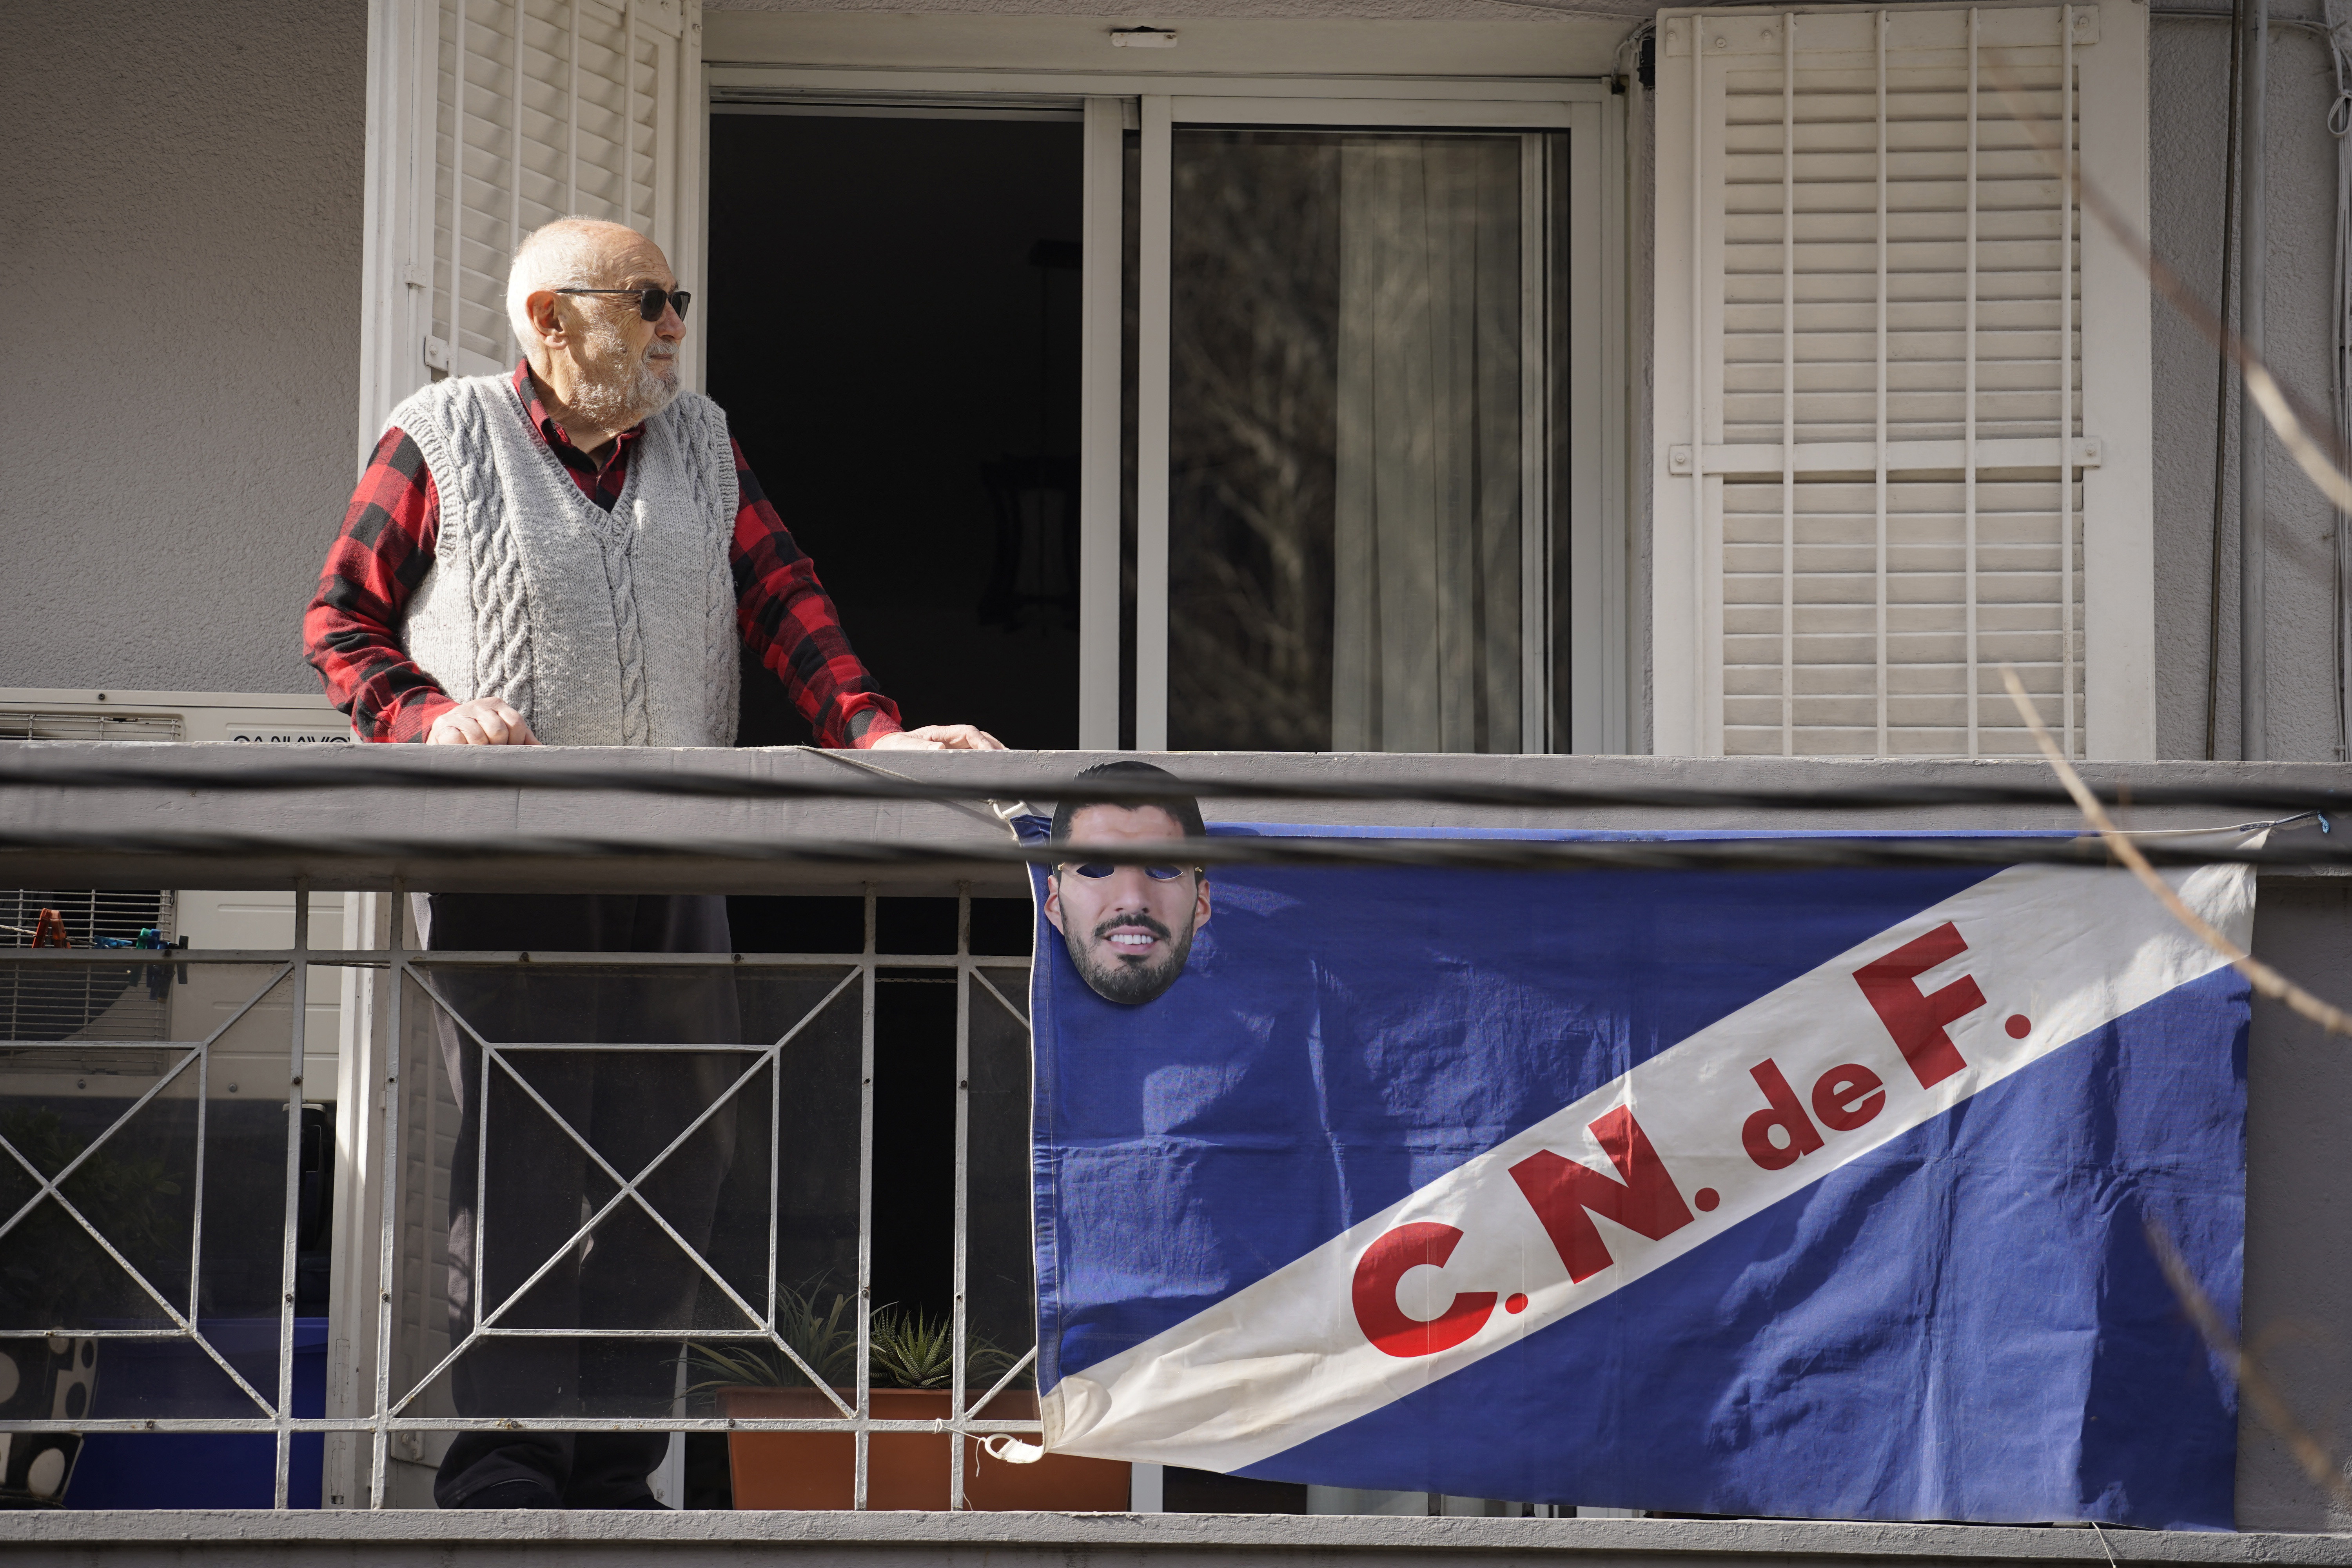 Even the balconies were dressed for the passage of the caravan with Suárez and his family (REUTERS / Andres Cuenca Olaondo)